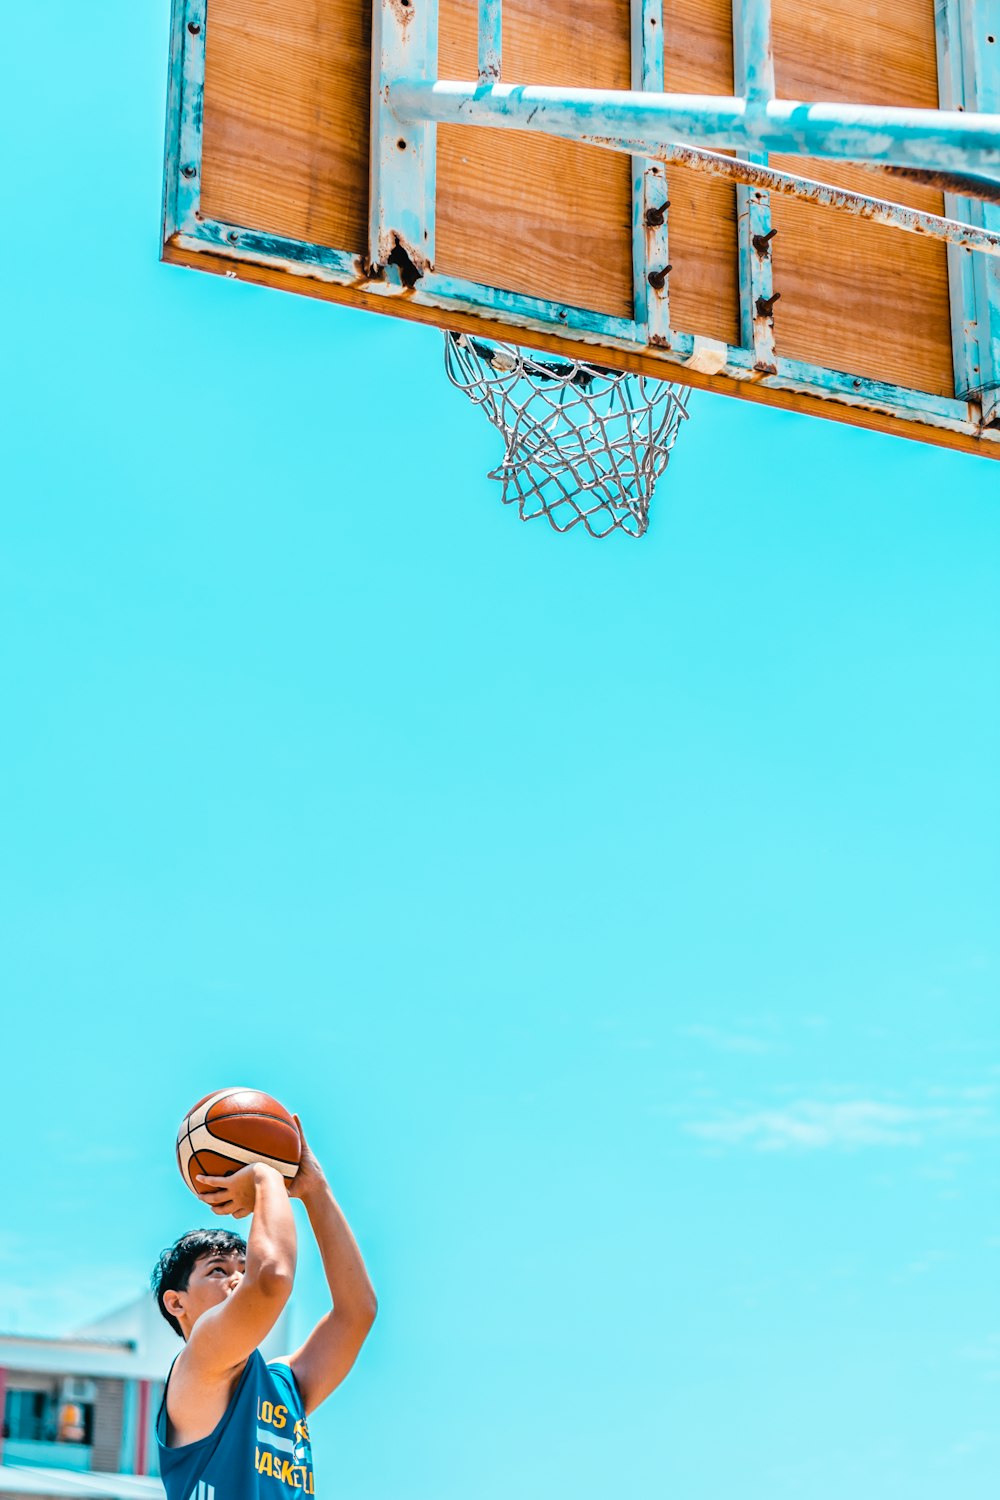 man holding basketball in front of basketball system during daytime